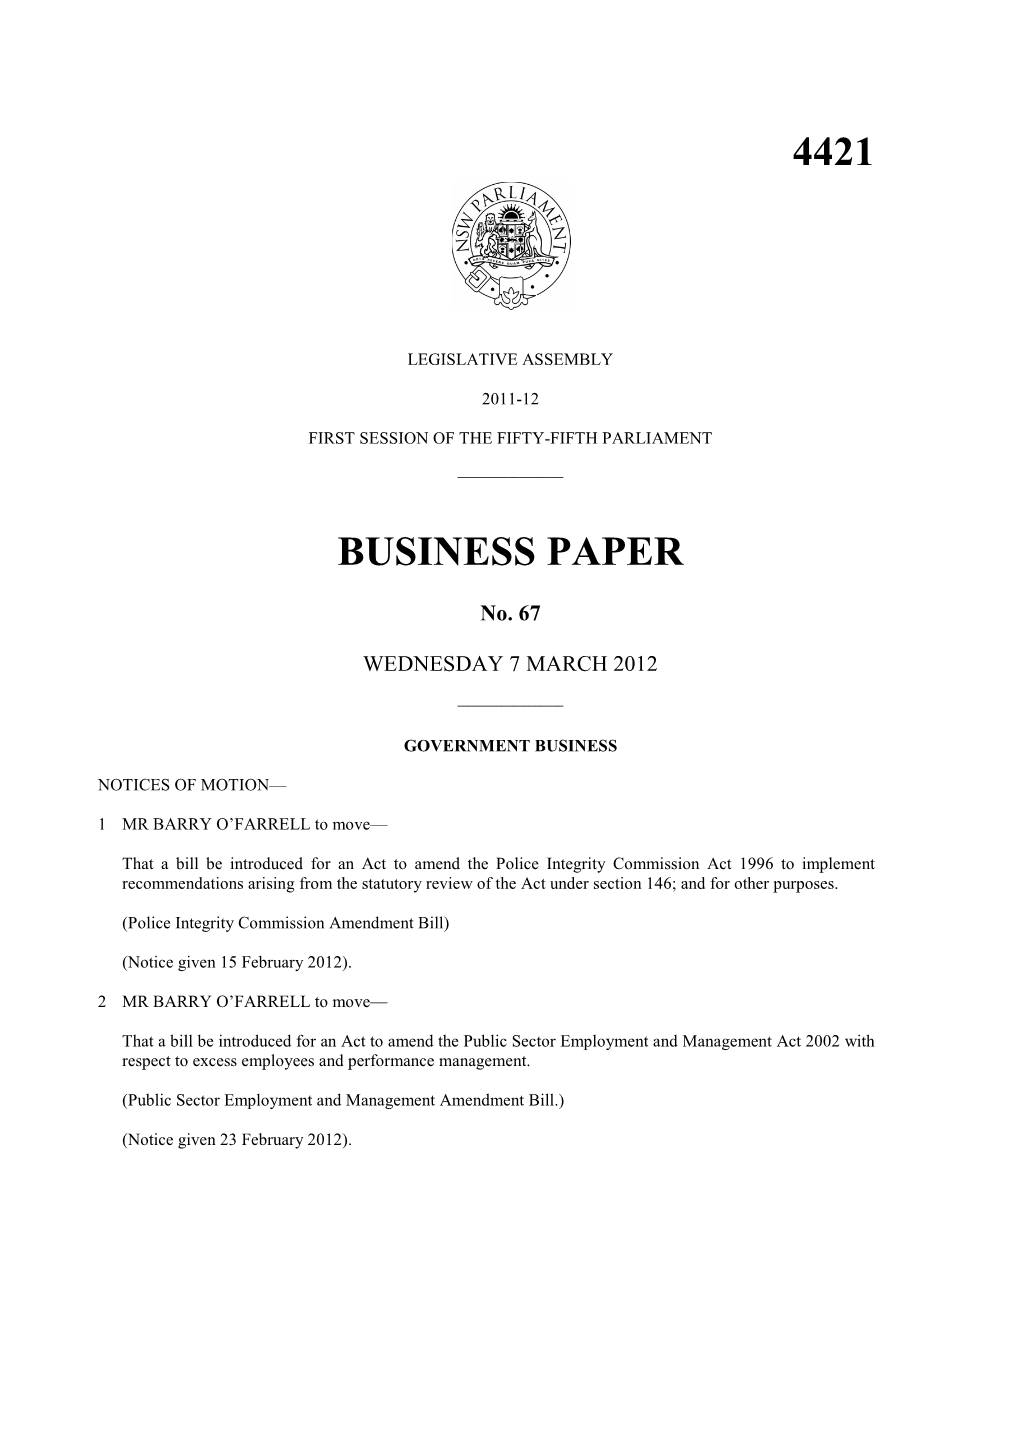 4421 Business Paper